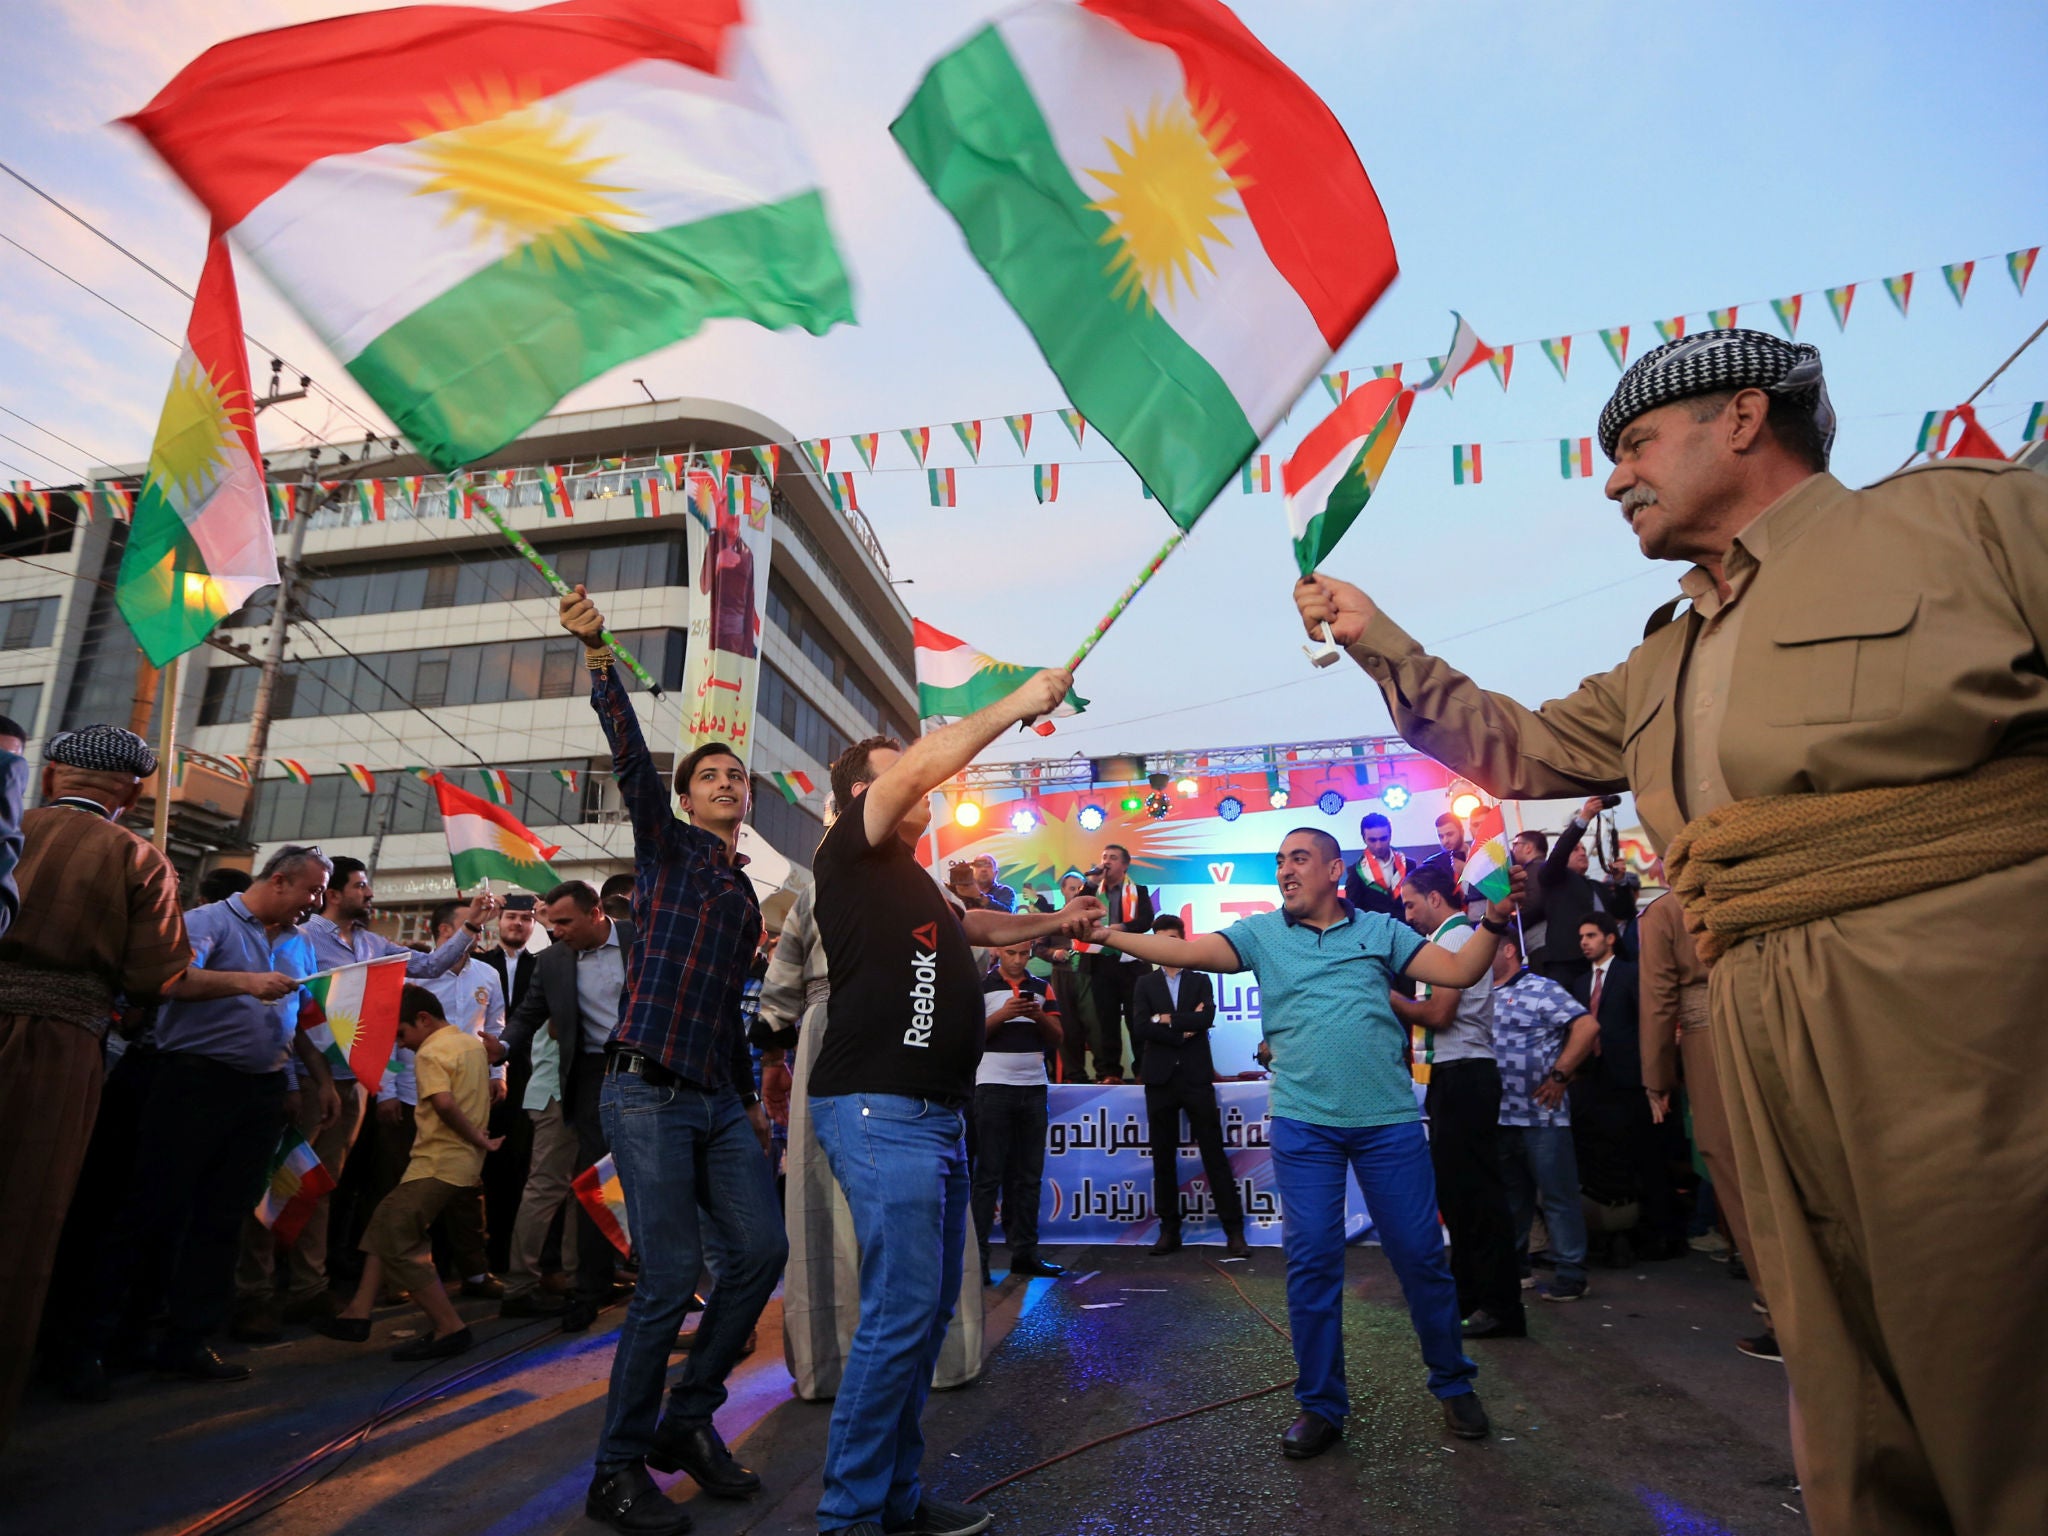 Kurds celebrate to show their support for the independence referendum in Duhok, Iraq